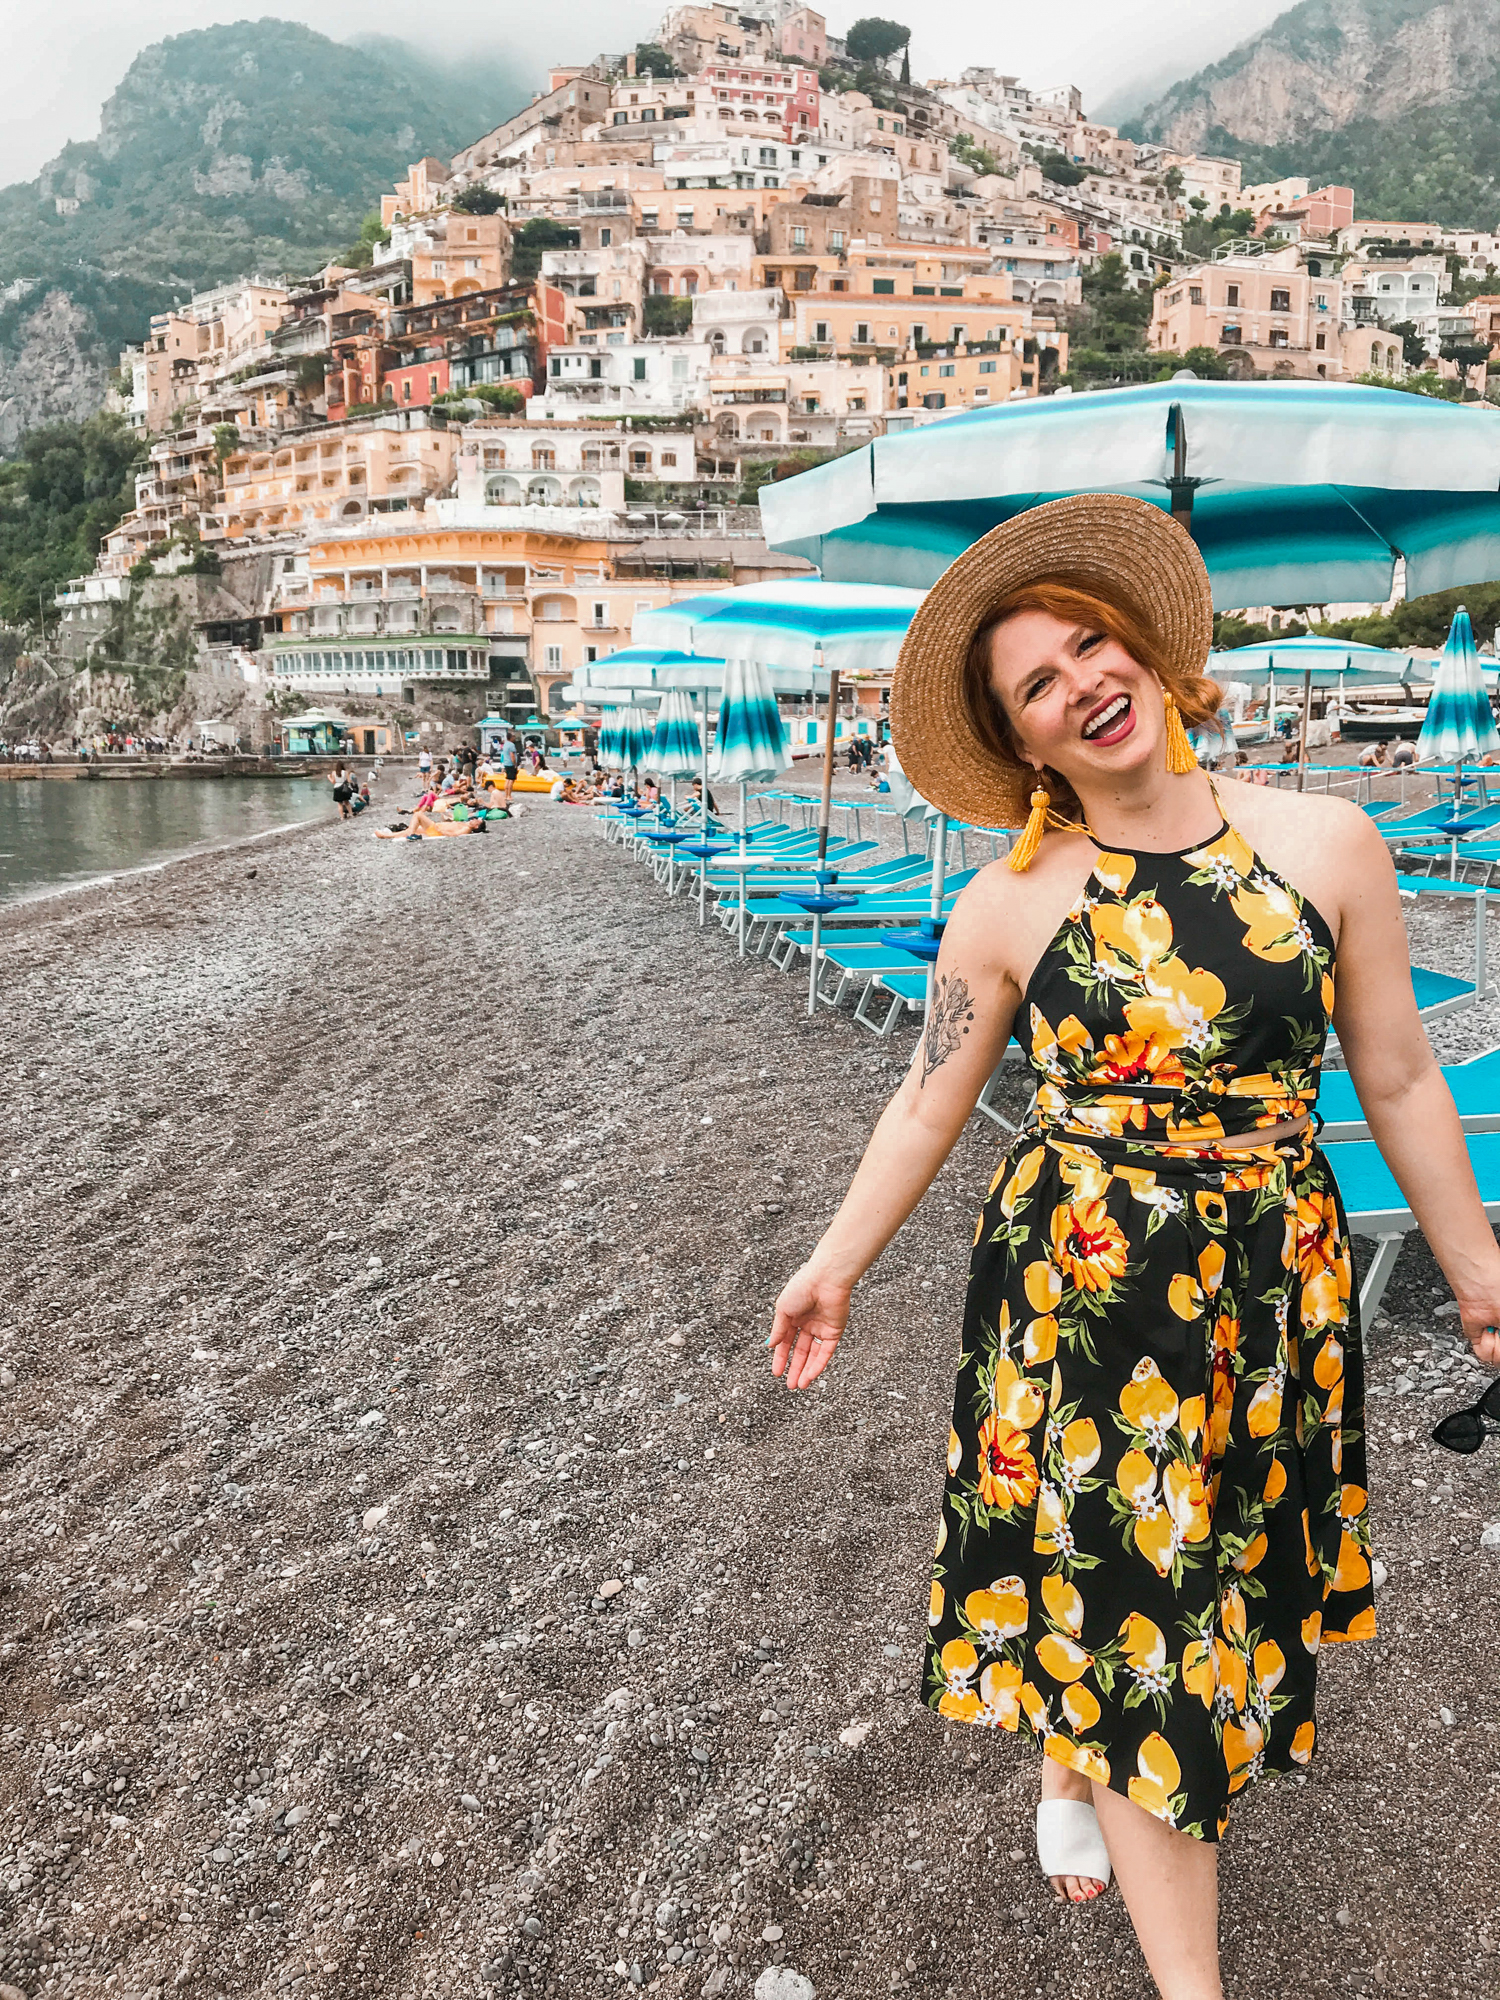 How to see the Amalfi Coast and avoid tourists, Positano – from California to Italy by Corey Marshall